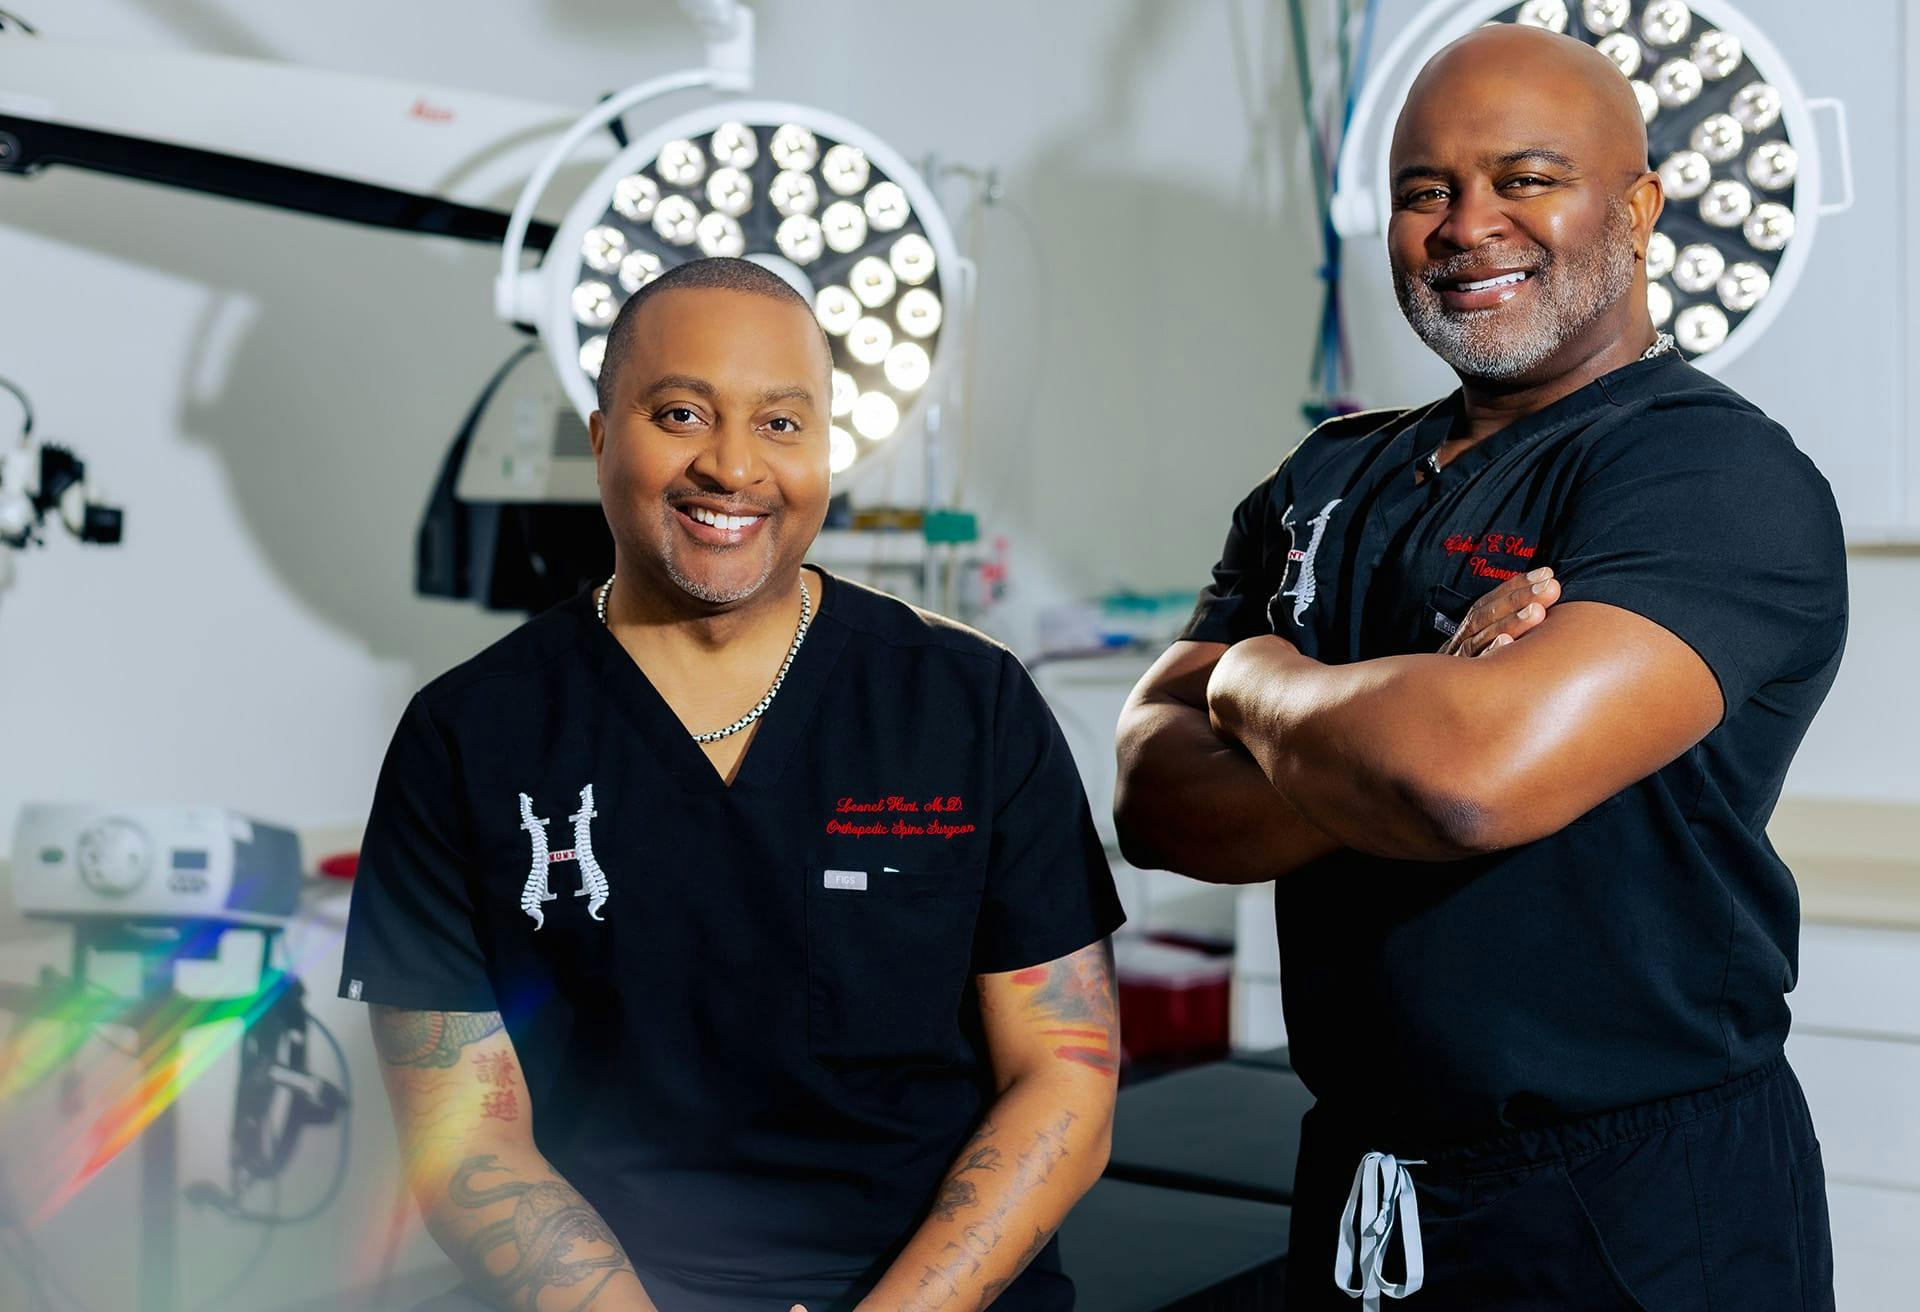 Hunt brothers in their operating room